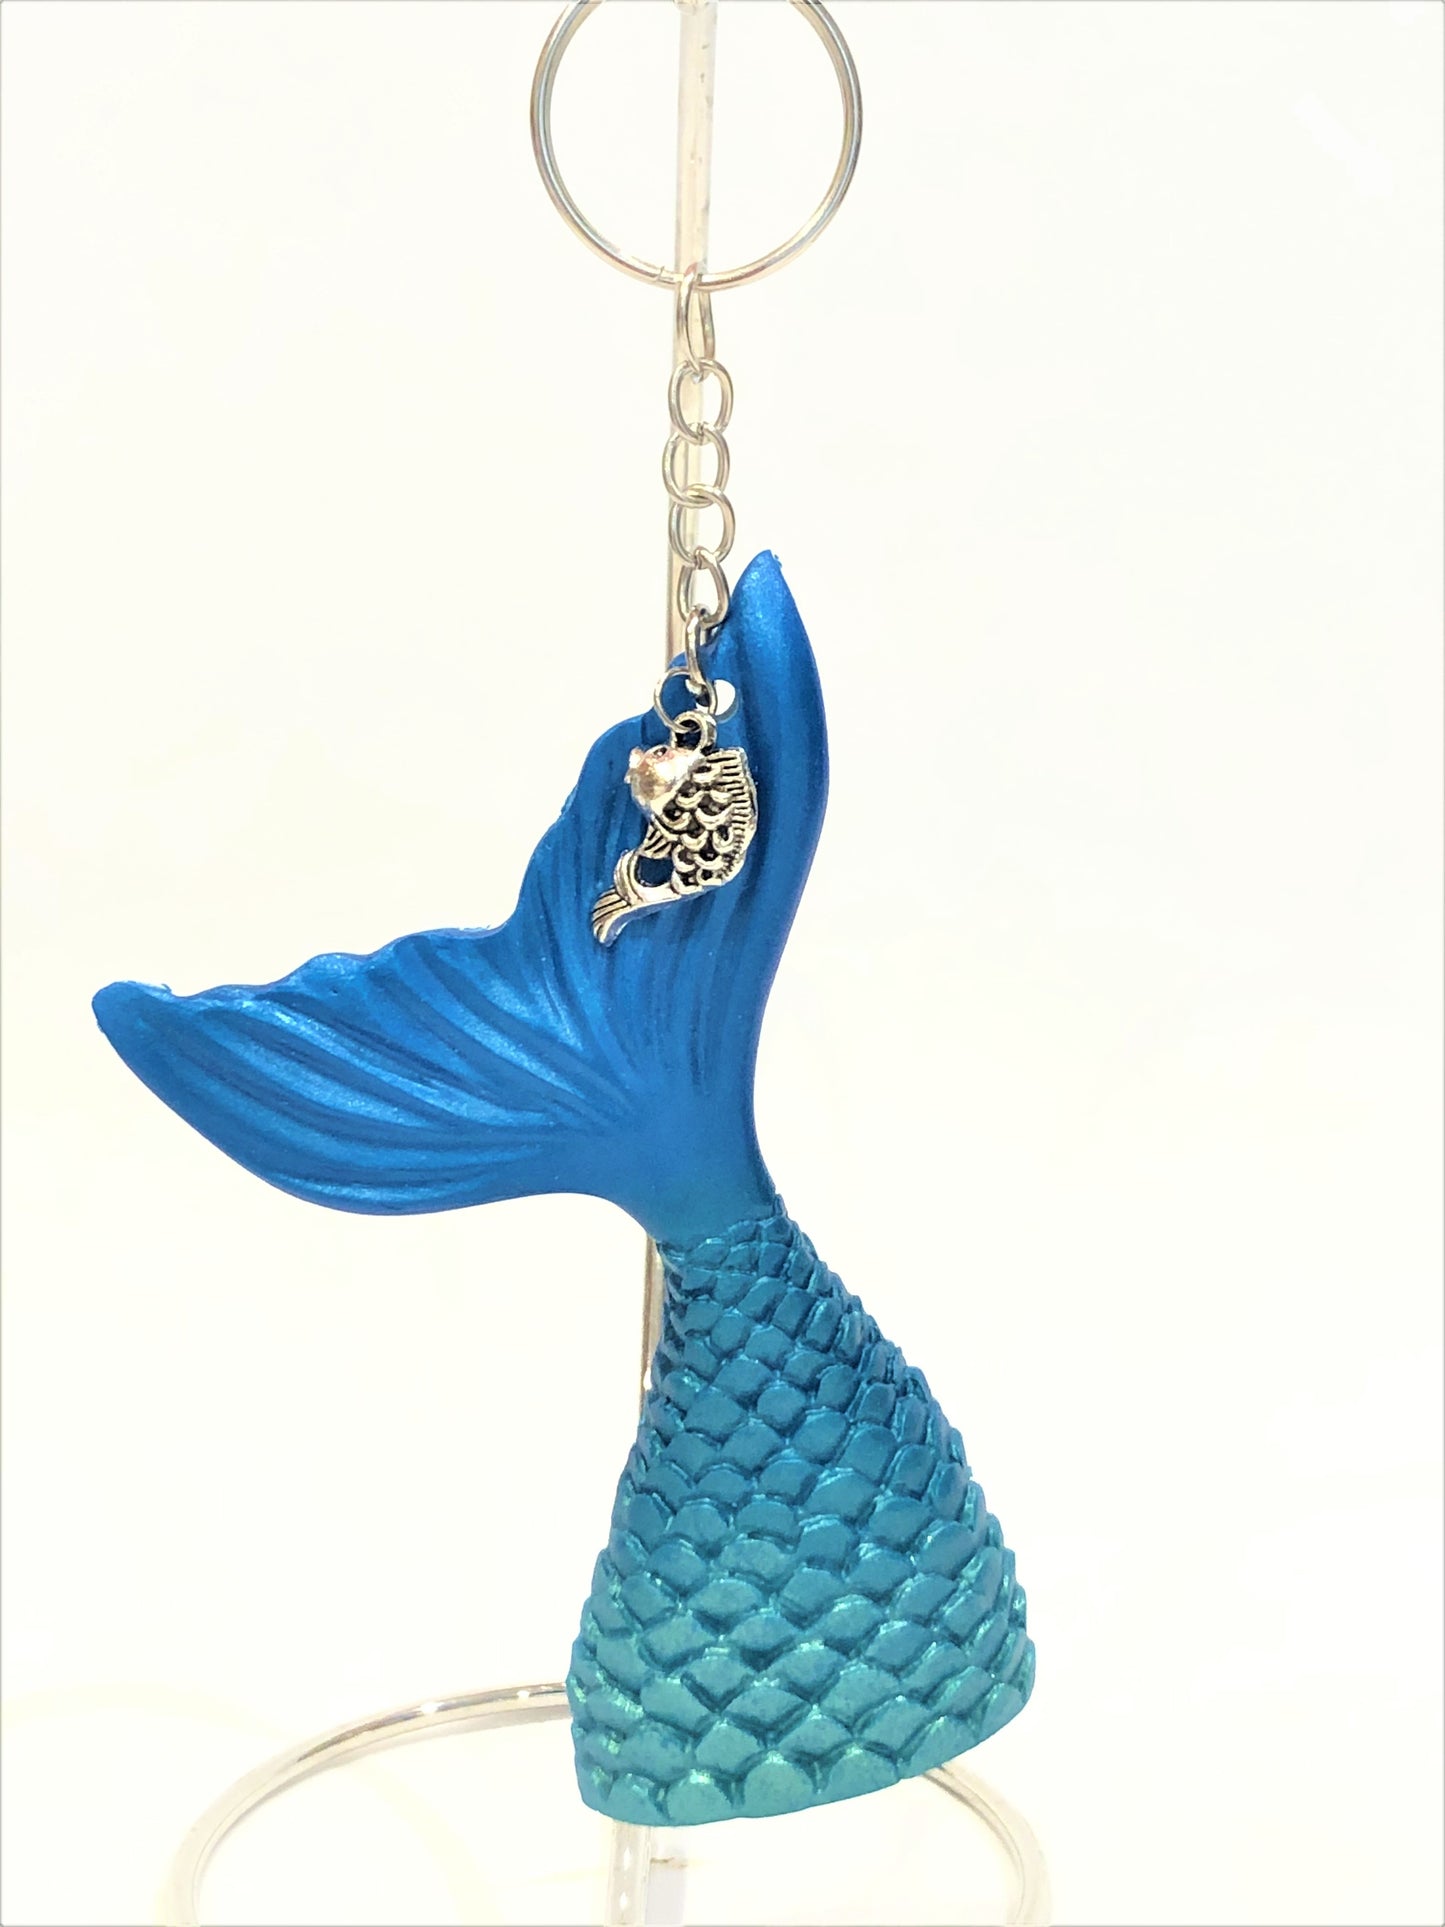 Large Mermaid Tail Key Chain with Charm